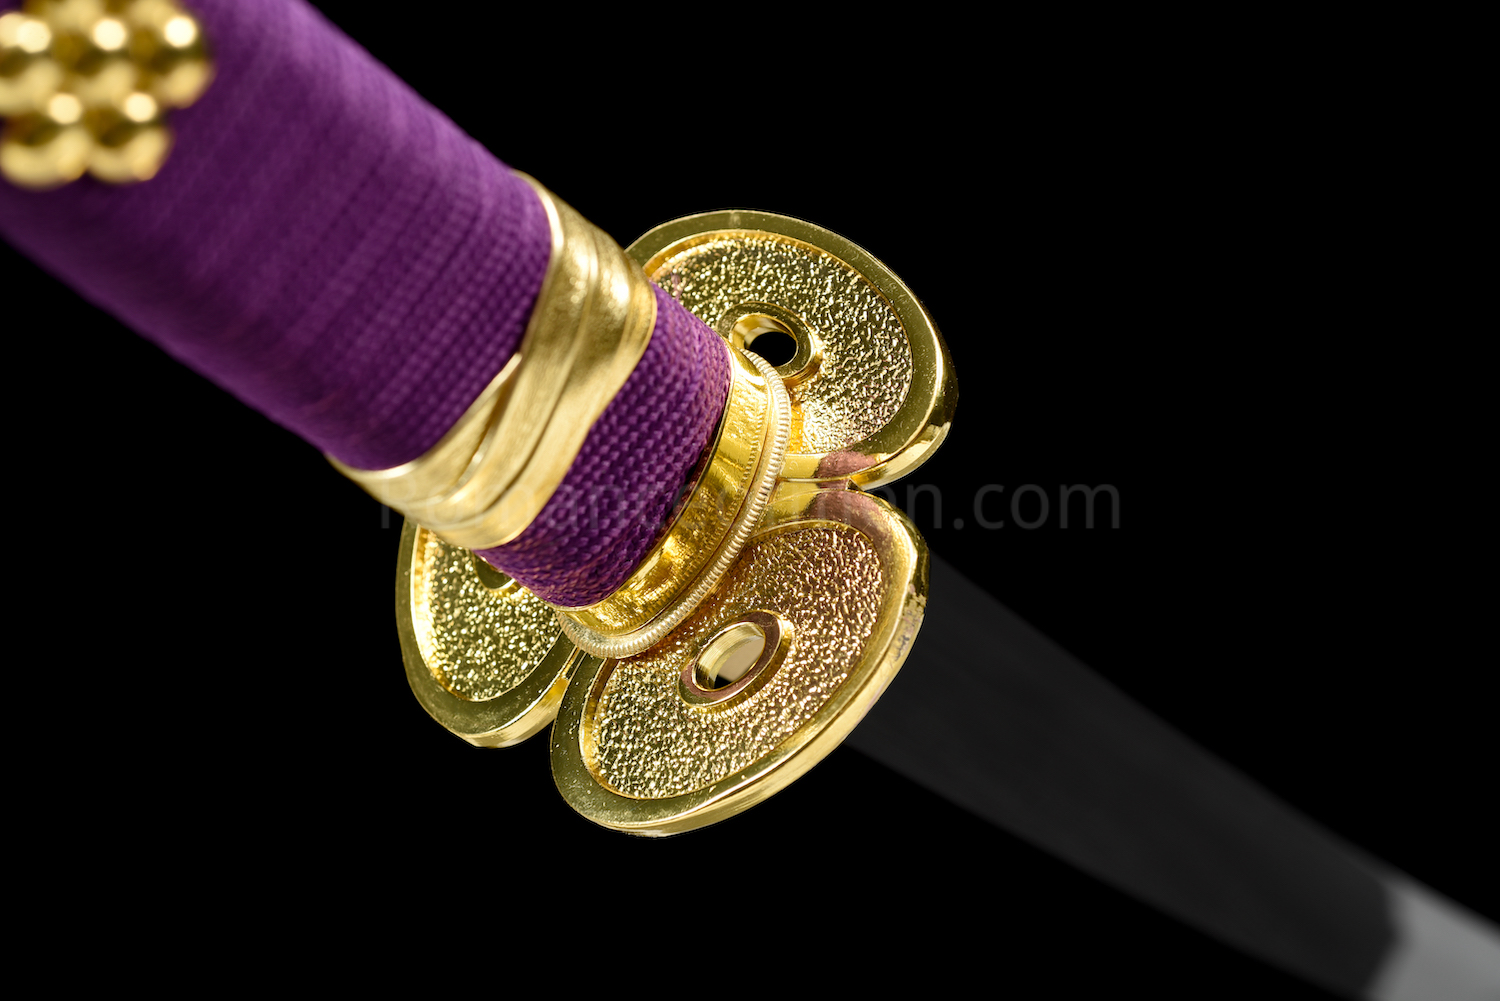 Zoro's Enma Katana And Scabbard - Carbon Steel Blade, Wooden Handle, Metal  Alloy Fittings - Length 40 1/2